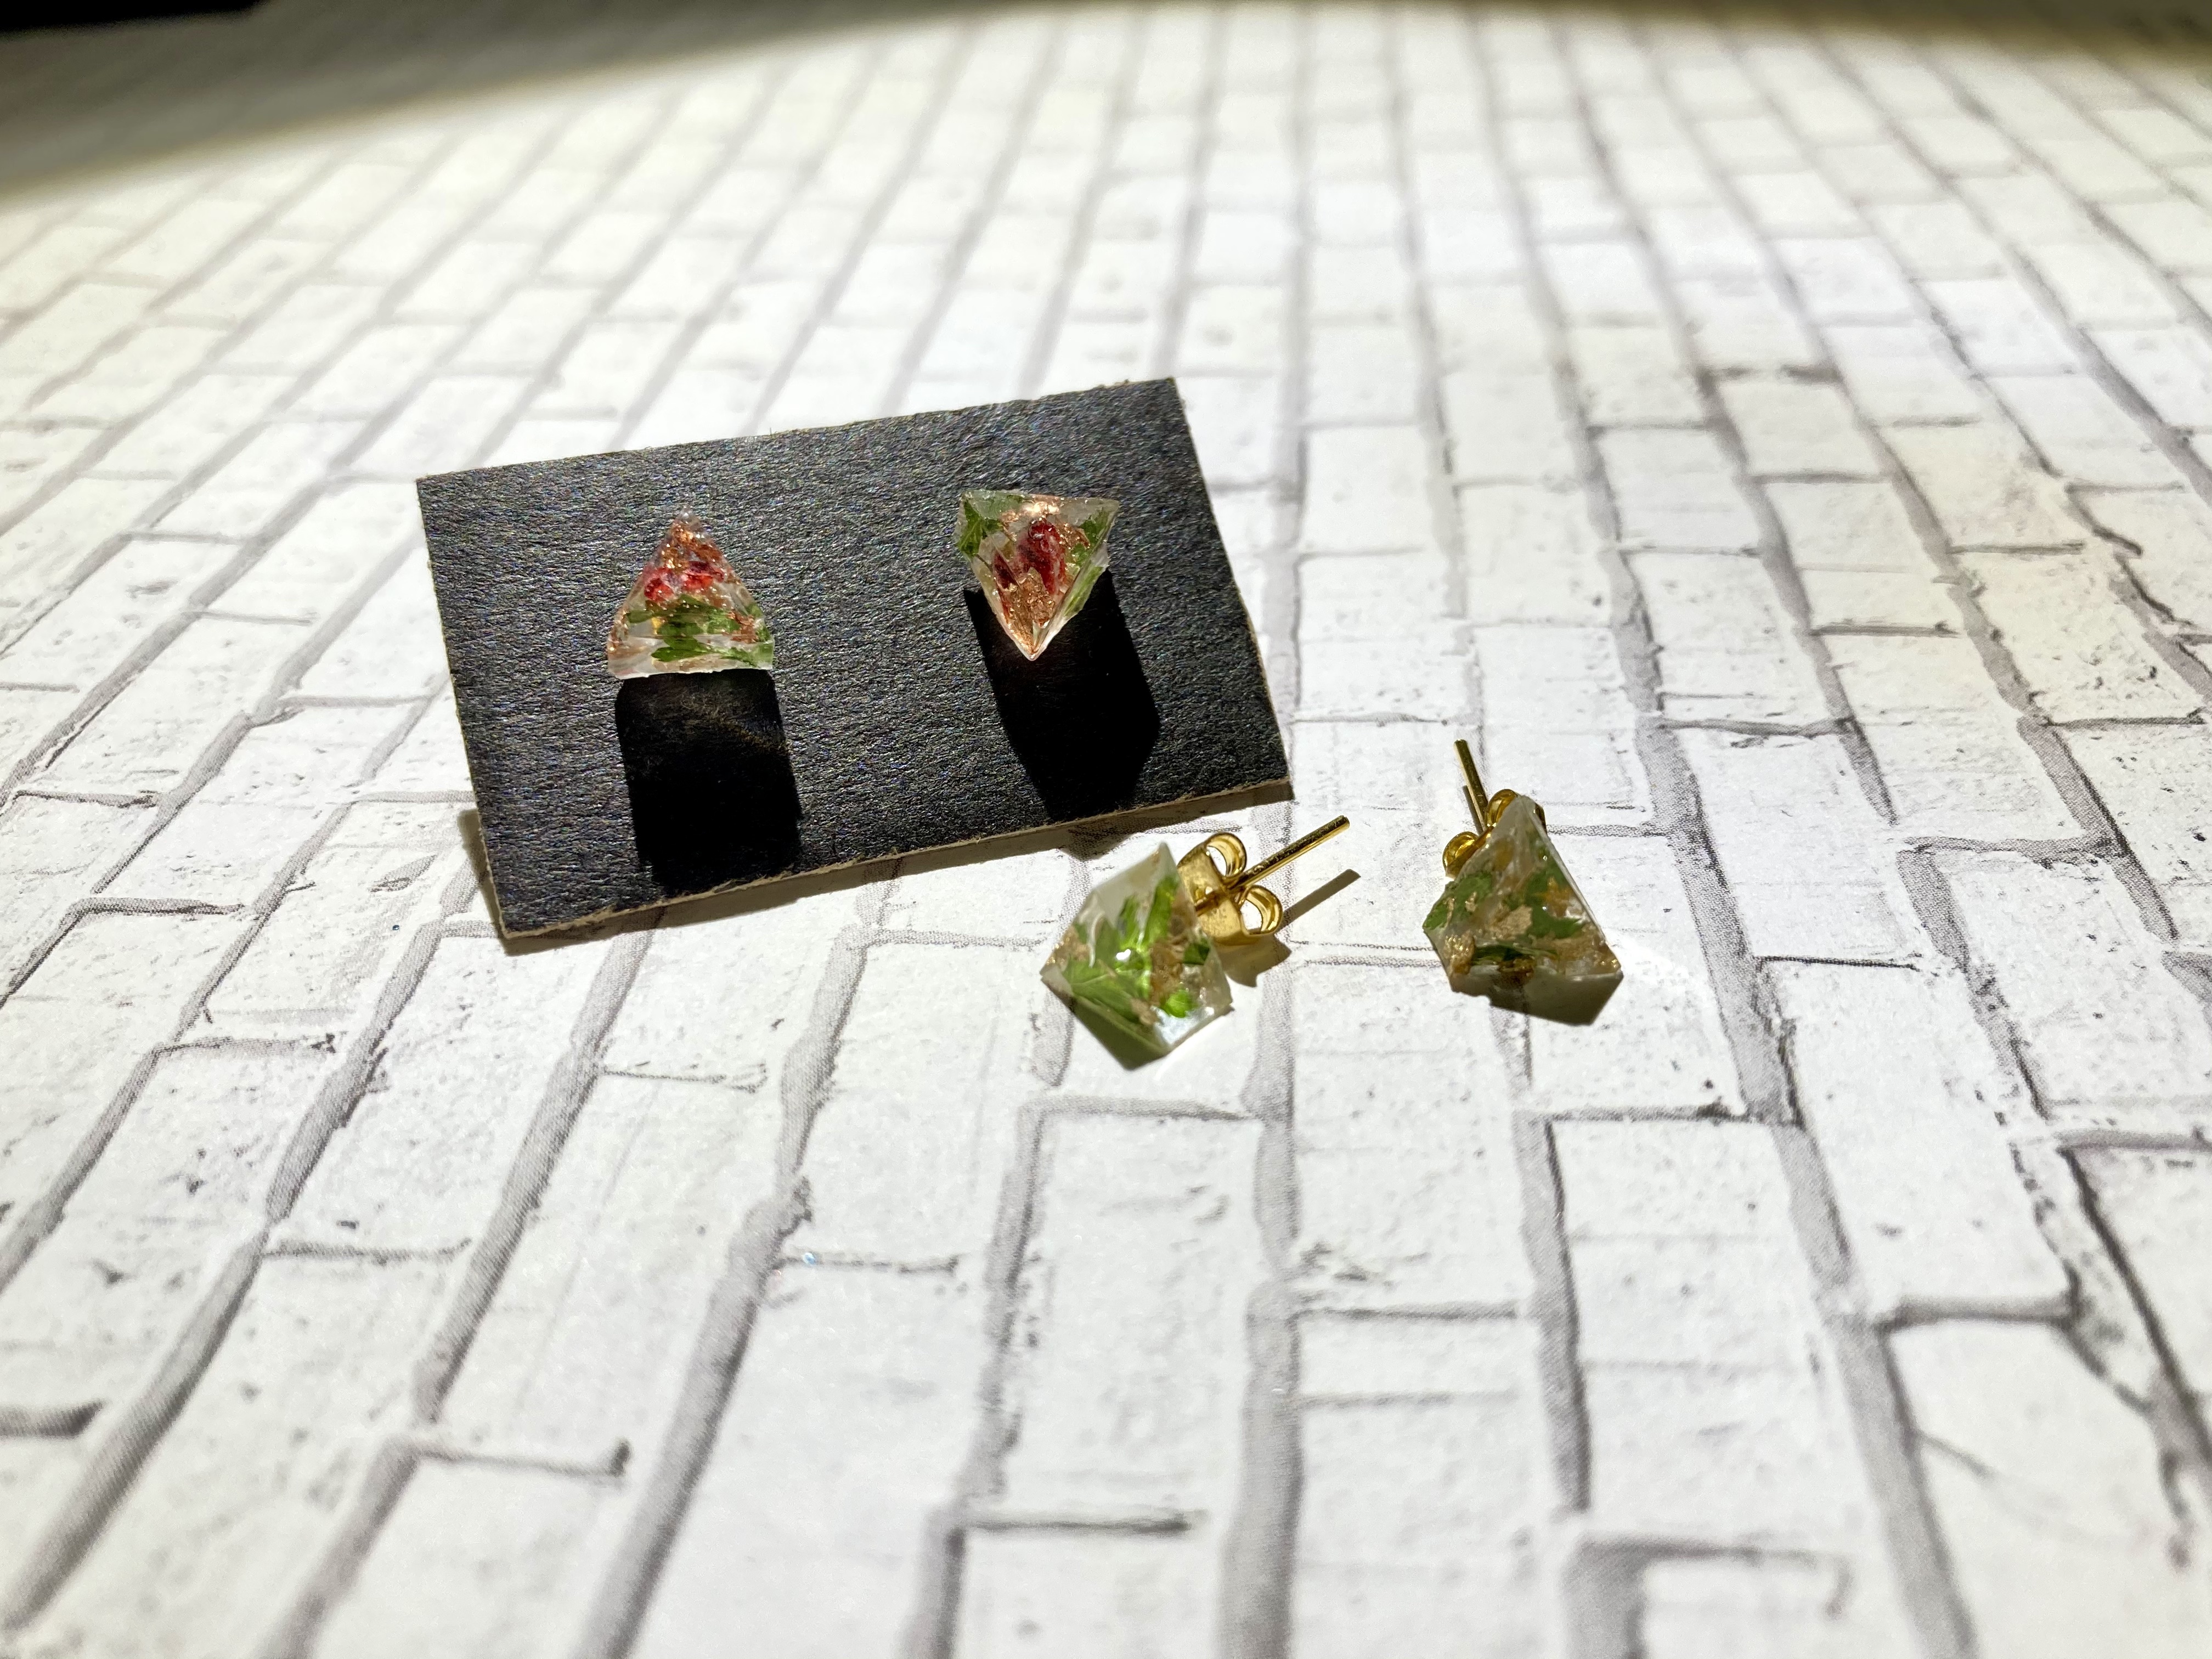 Botanical Triangle Studs | Triangle shape with real plants embeded in resin with gold flakes and gold pegs. Dainty and cute.  Nickel free brass.